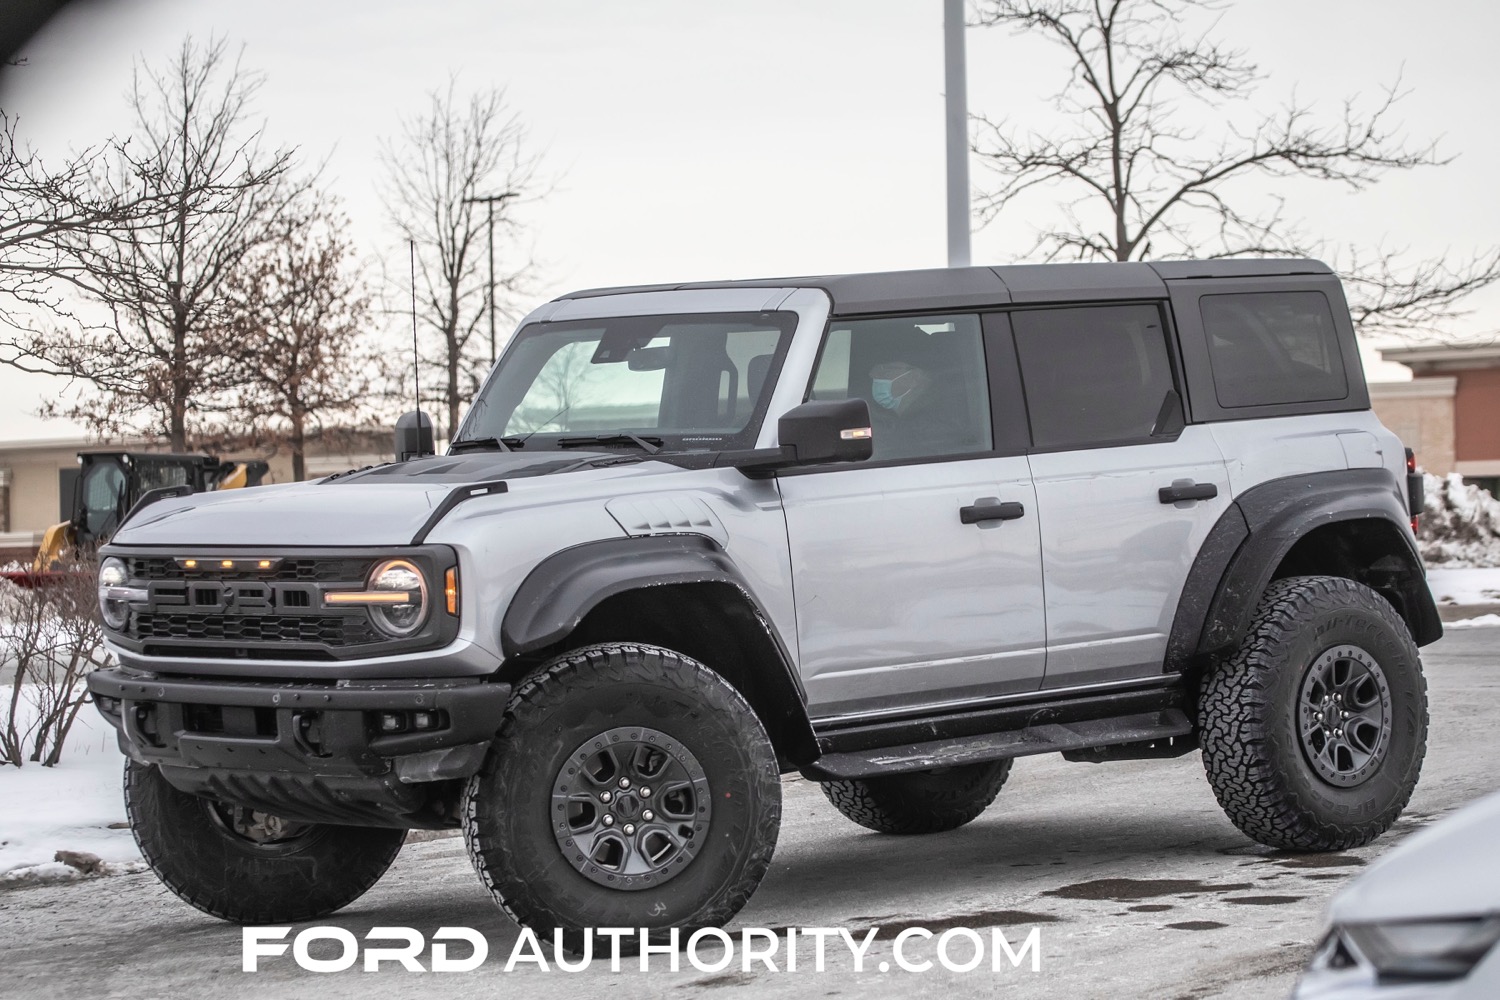 2022-Ford-Bronco-Raptor-Iconic-Silver-Real-World-Photos-Exterior-002.jpg